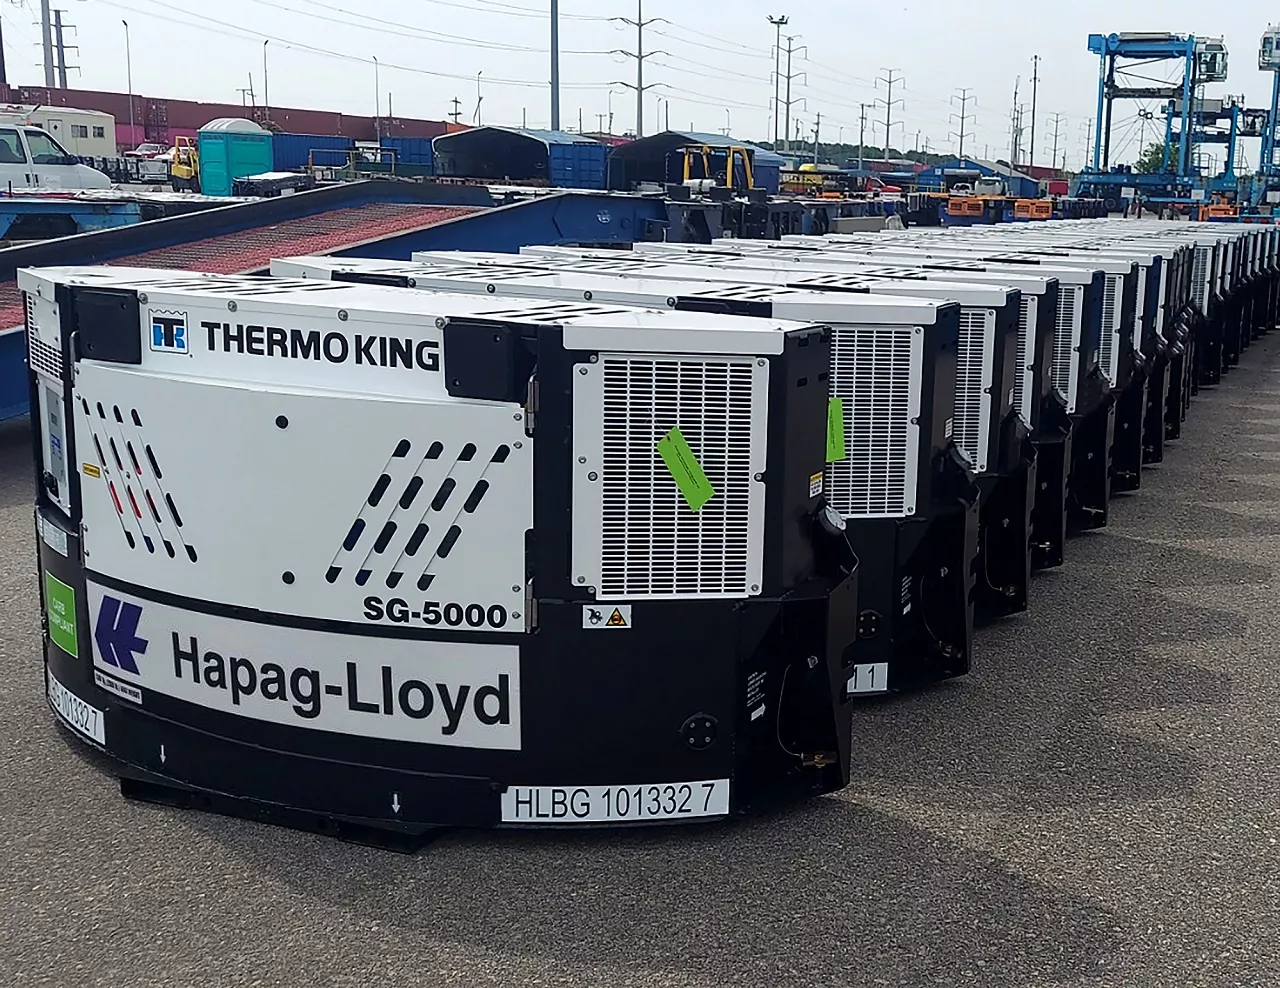 Thermo King Supplies Hapag-Lloyd with High Performance Generator Sets 